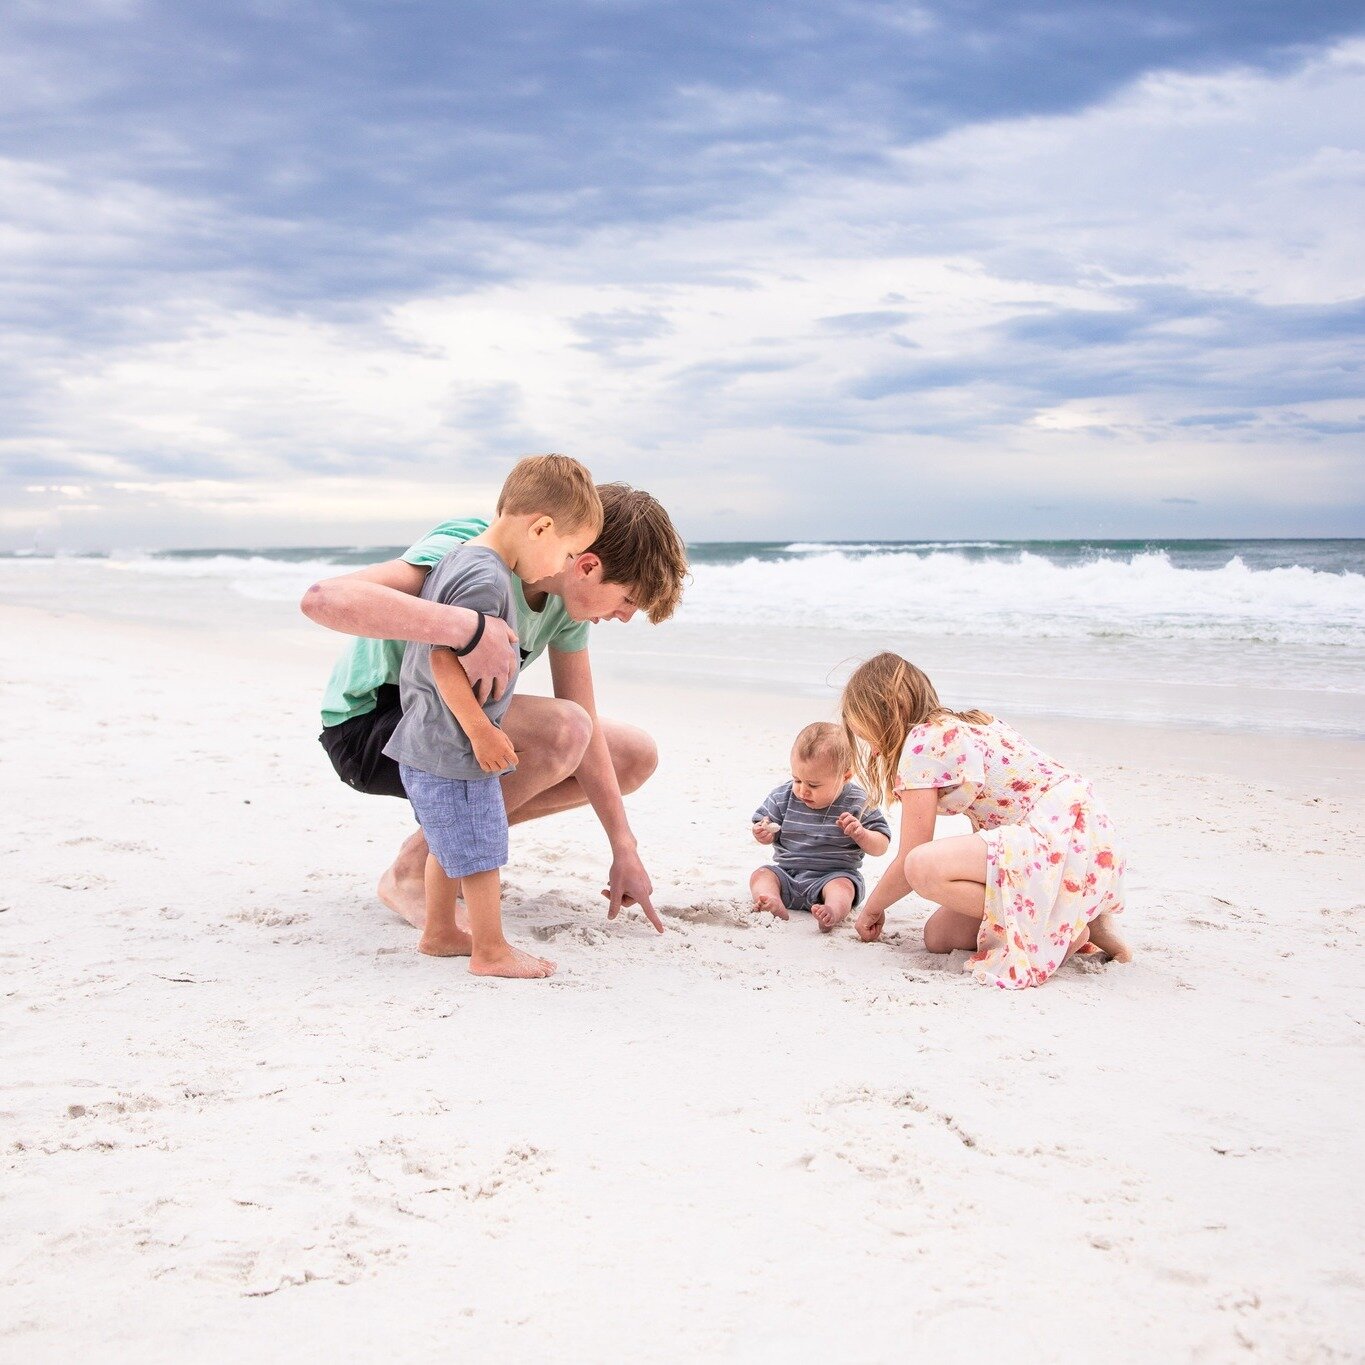 Navarre Beach is for families!

https://www.jessicasalortphotos.com/sunrise-morning-mini-sessions

📞Contact Jessica Salort for all your photo needs! (850)313-1586

&ldquo;Your #1 choice in all things photo!&rdquo; 📸

www.jessicasalort.com

https://